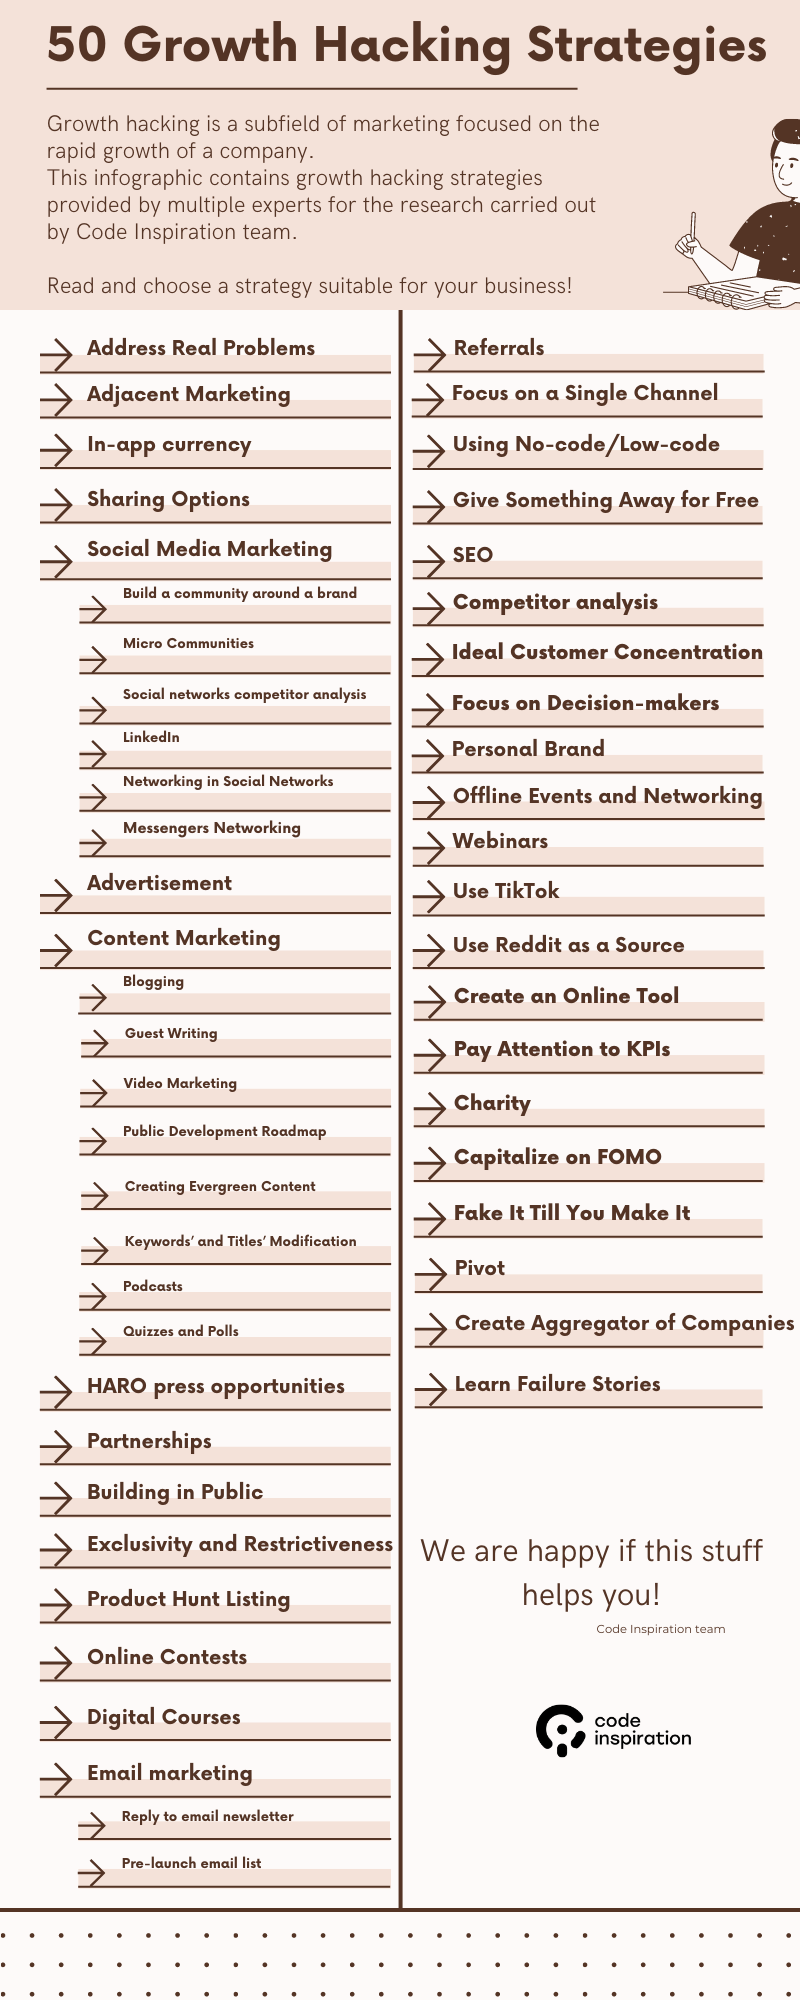 Growth hacking strategies. Am image with a list of 50 growth hacks